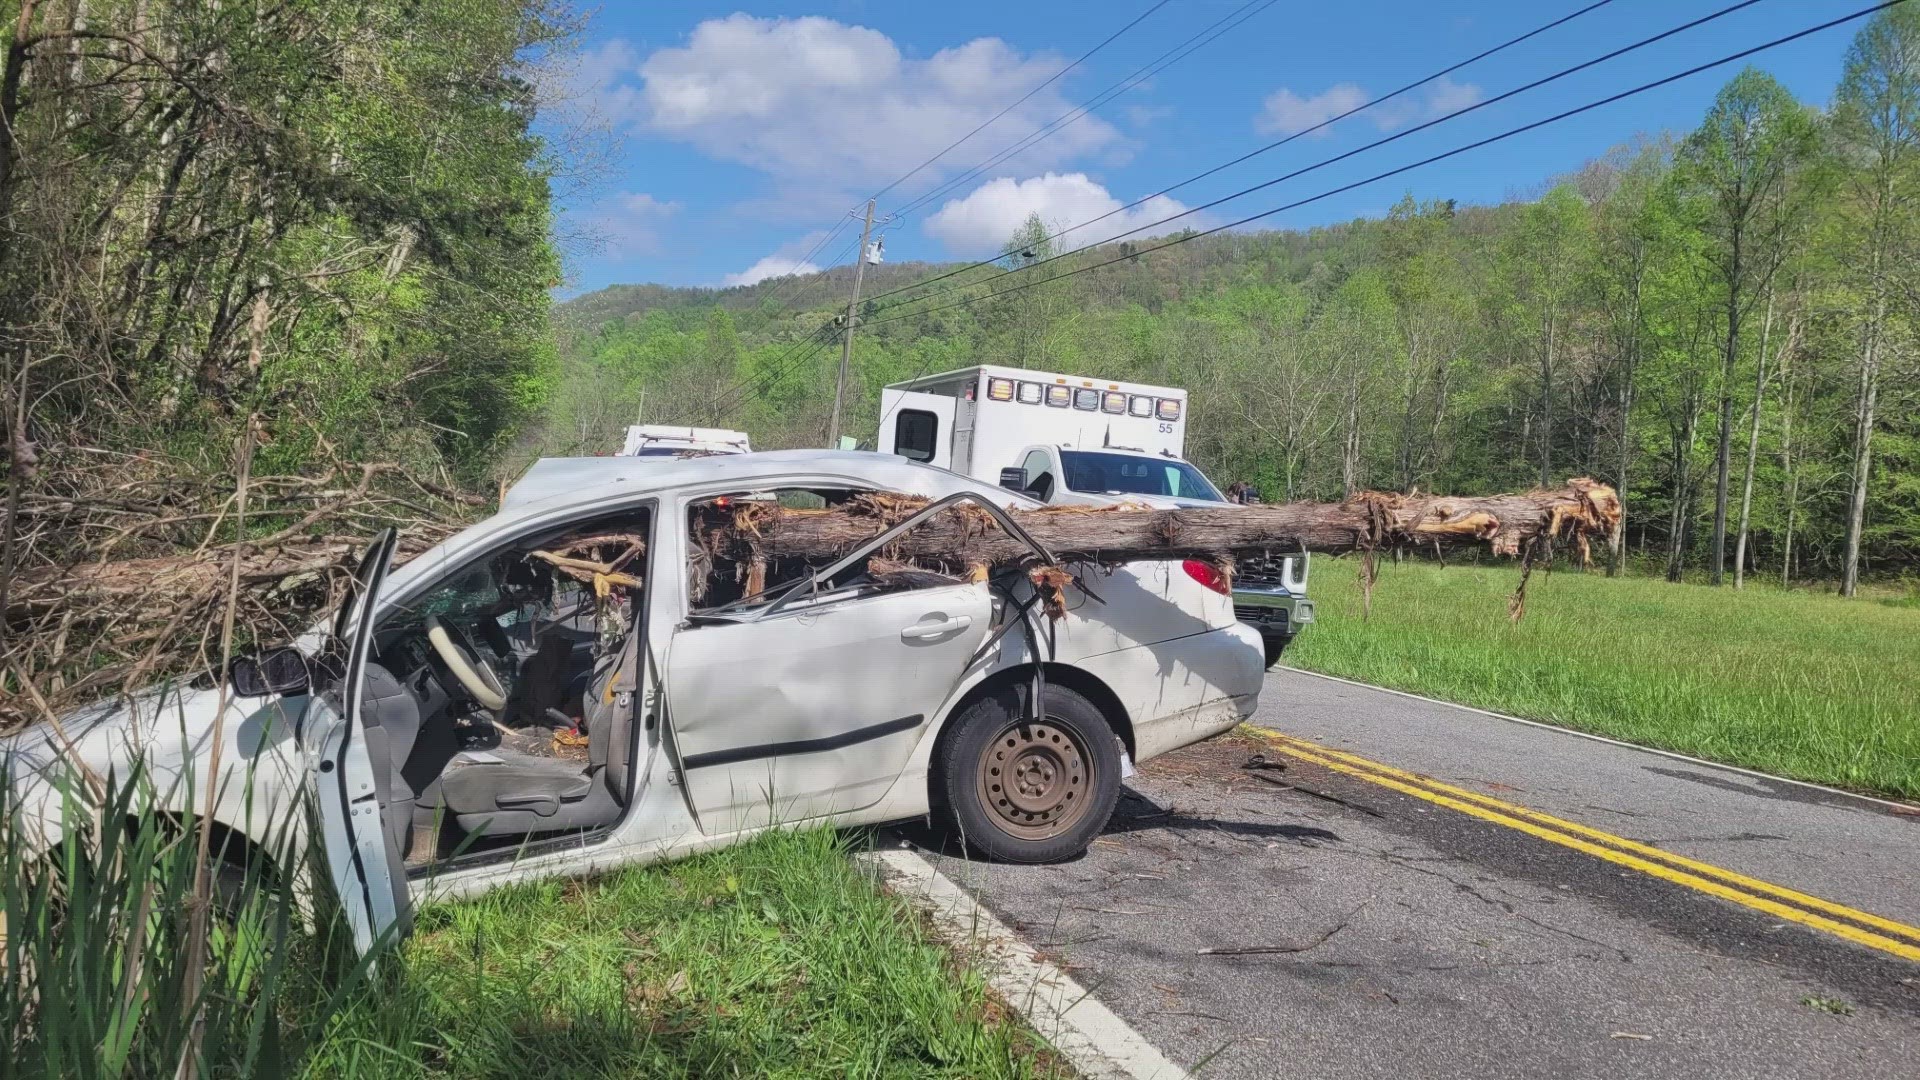 The South Greene Volunteer Fire Department said the vehicle left the roadway, striking a tree that went through the front windshield and out the back of the car.